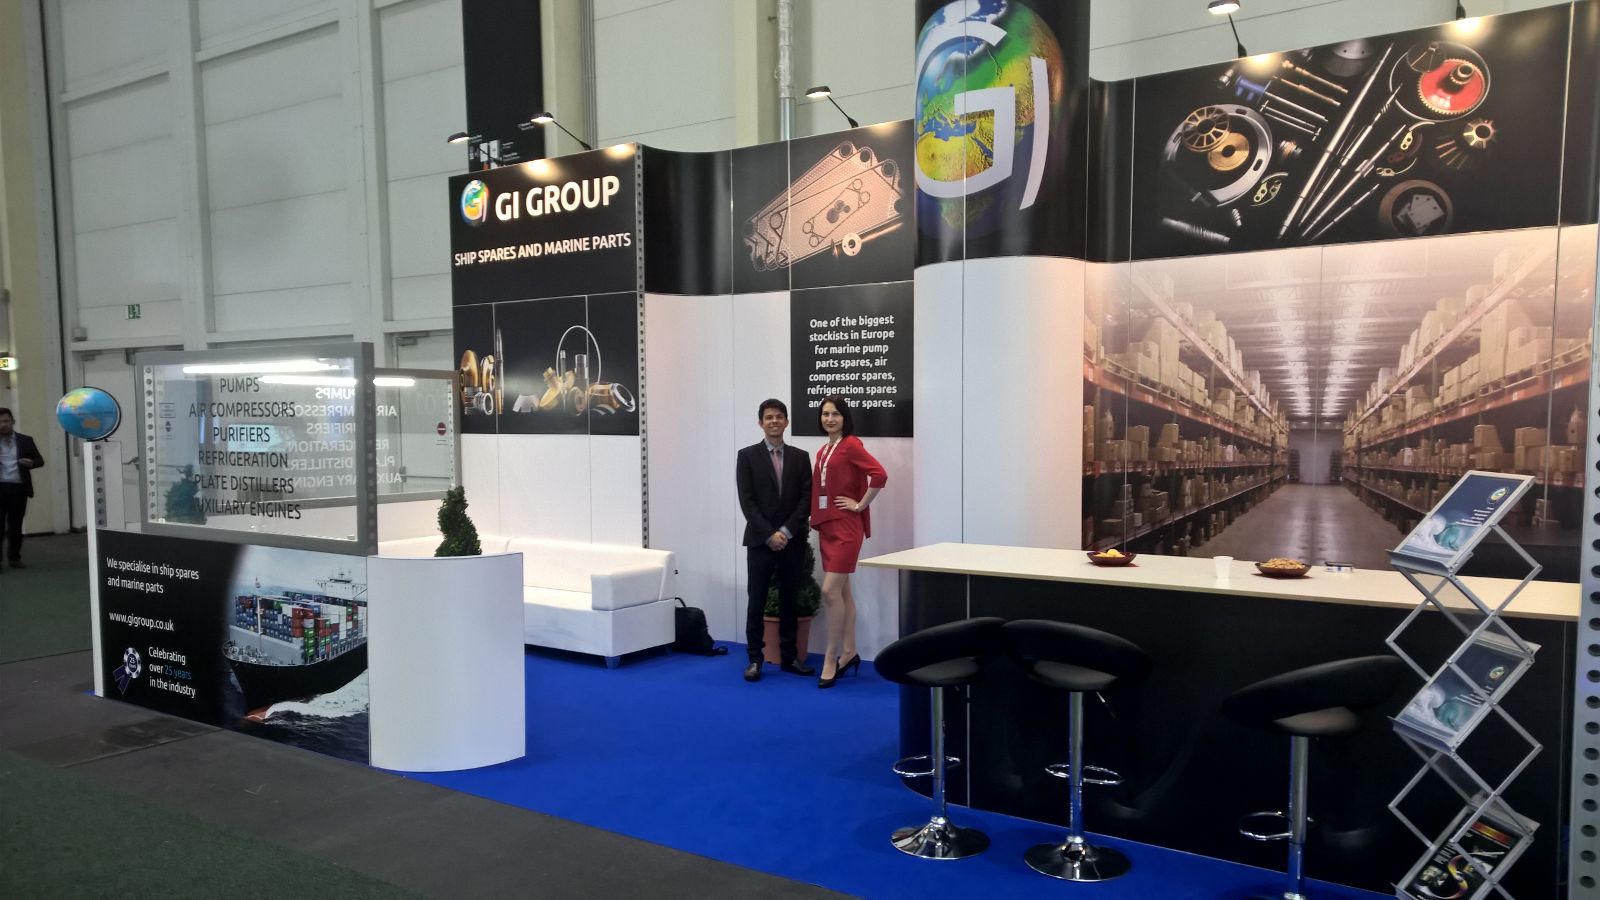 GI Group - SMM Exhibition Stand